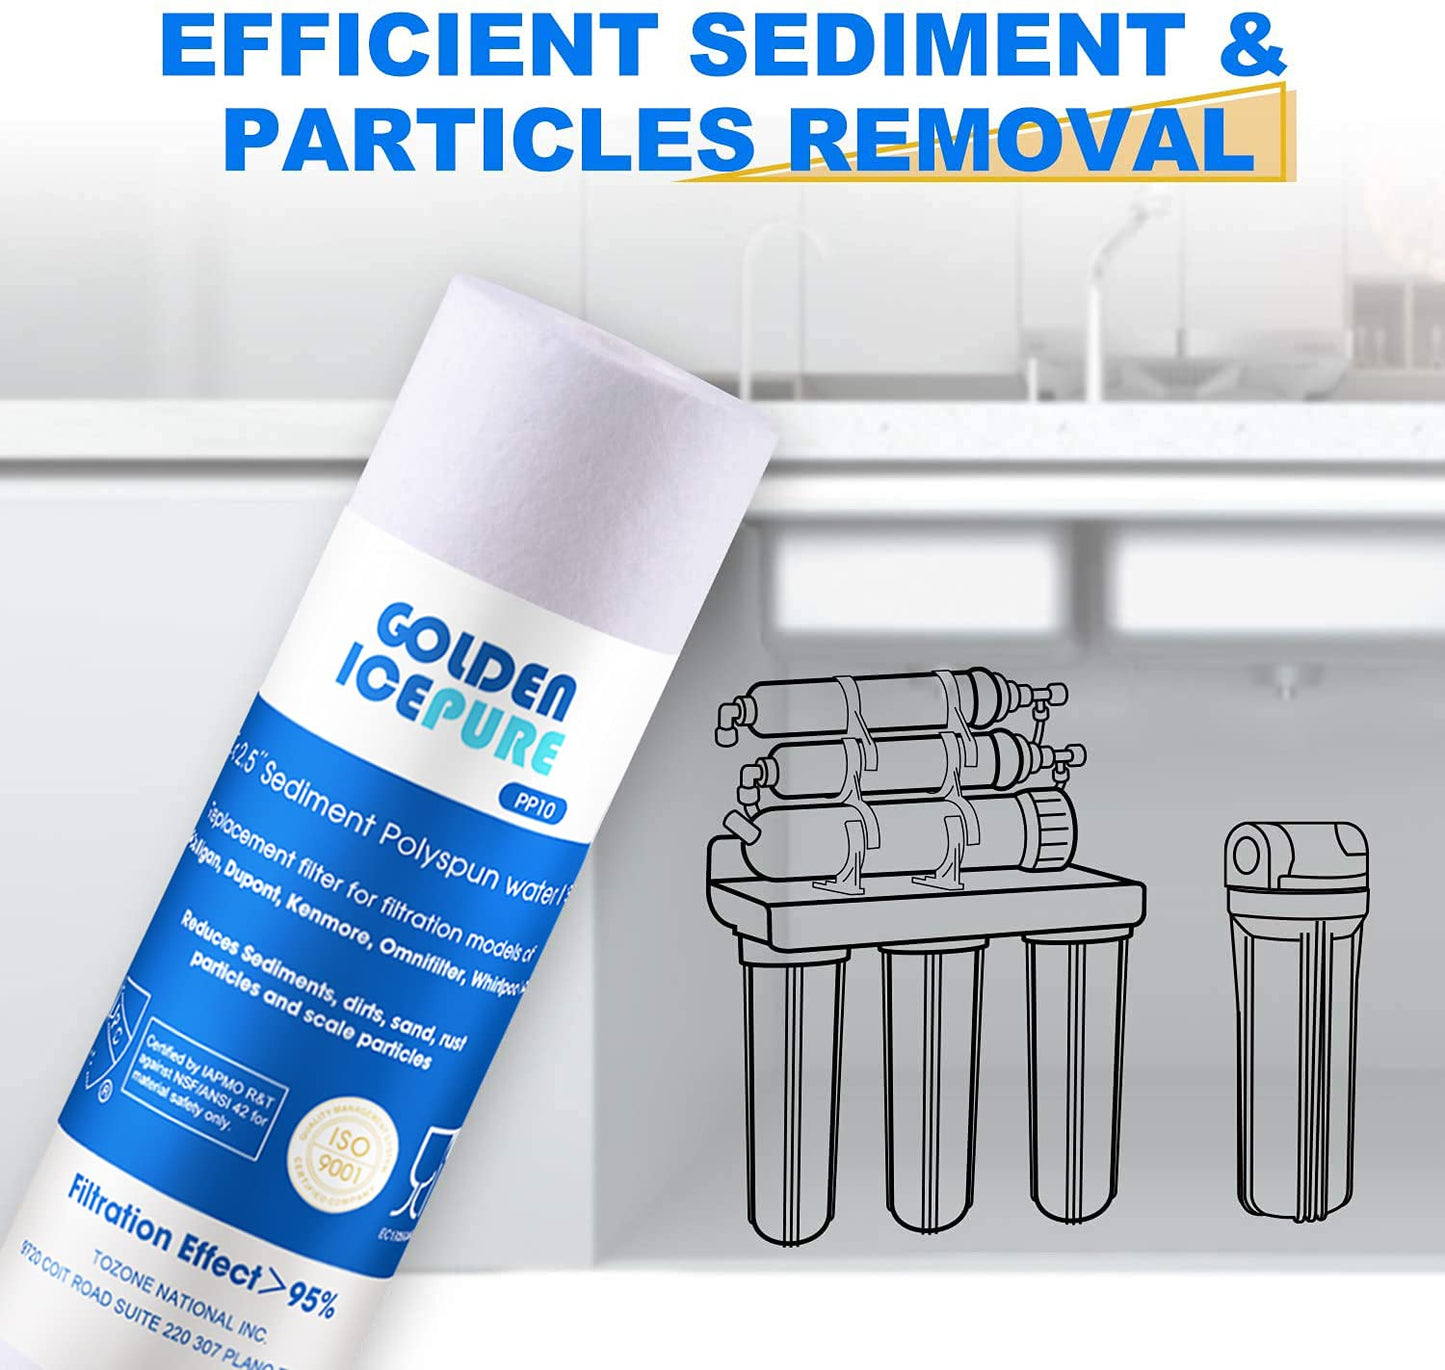 GOLDEN ICEPURE 5 Micron 10" x 2.5"  Water Filter Replacement Unit 4PACK - Opticdeals